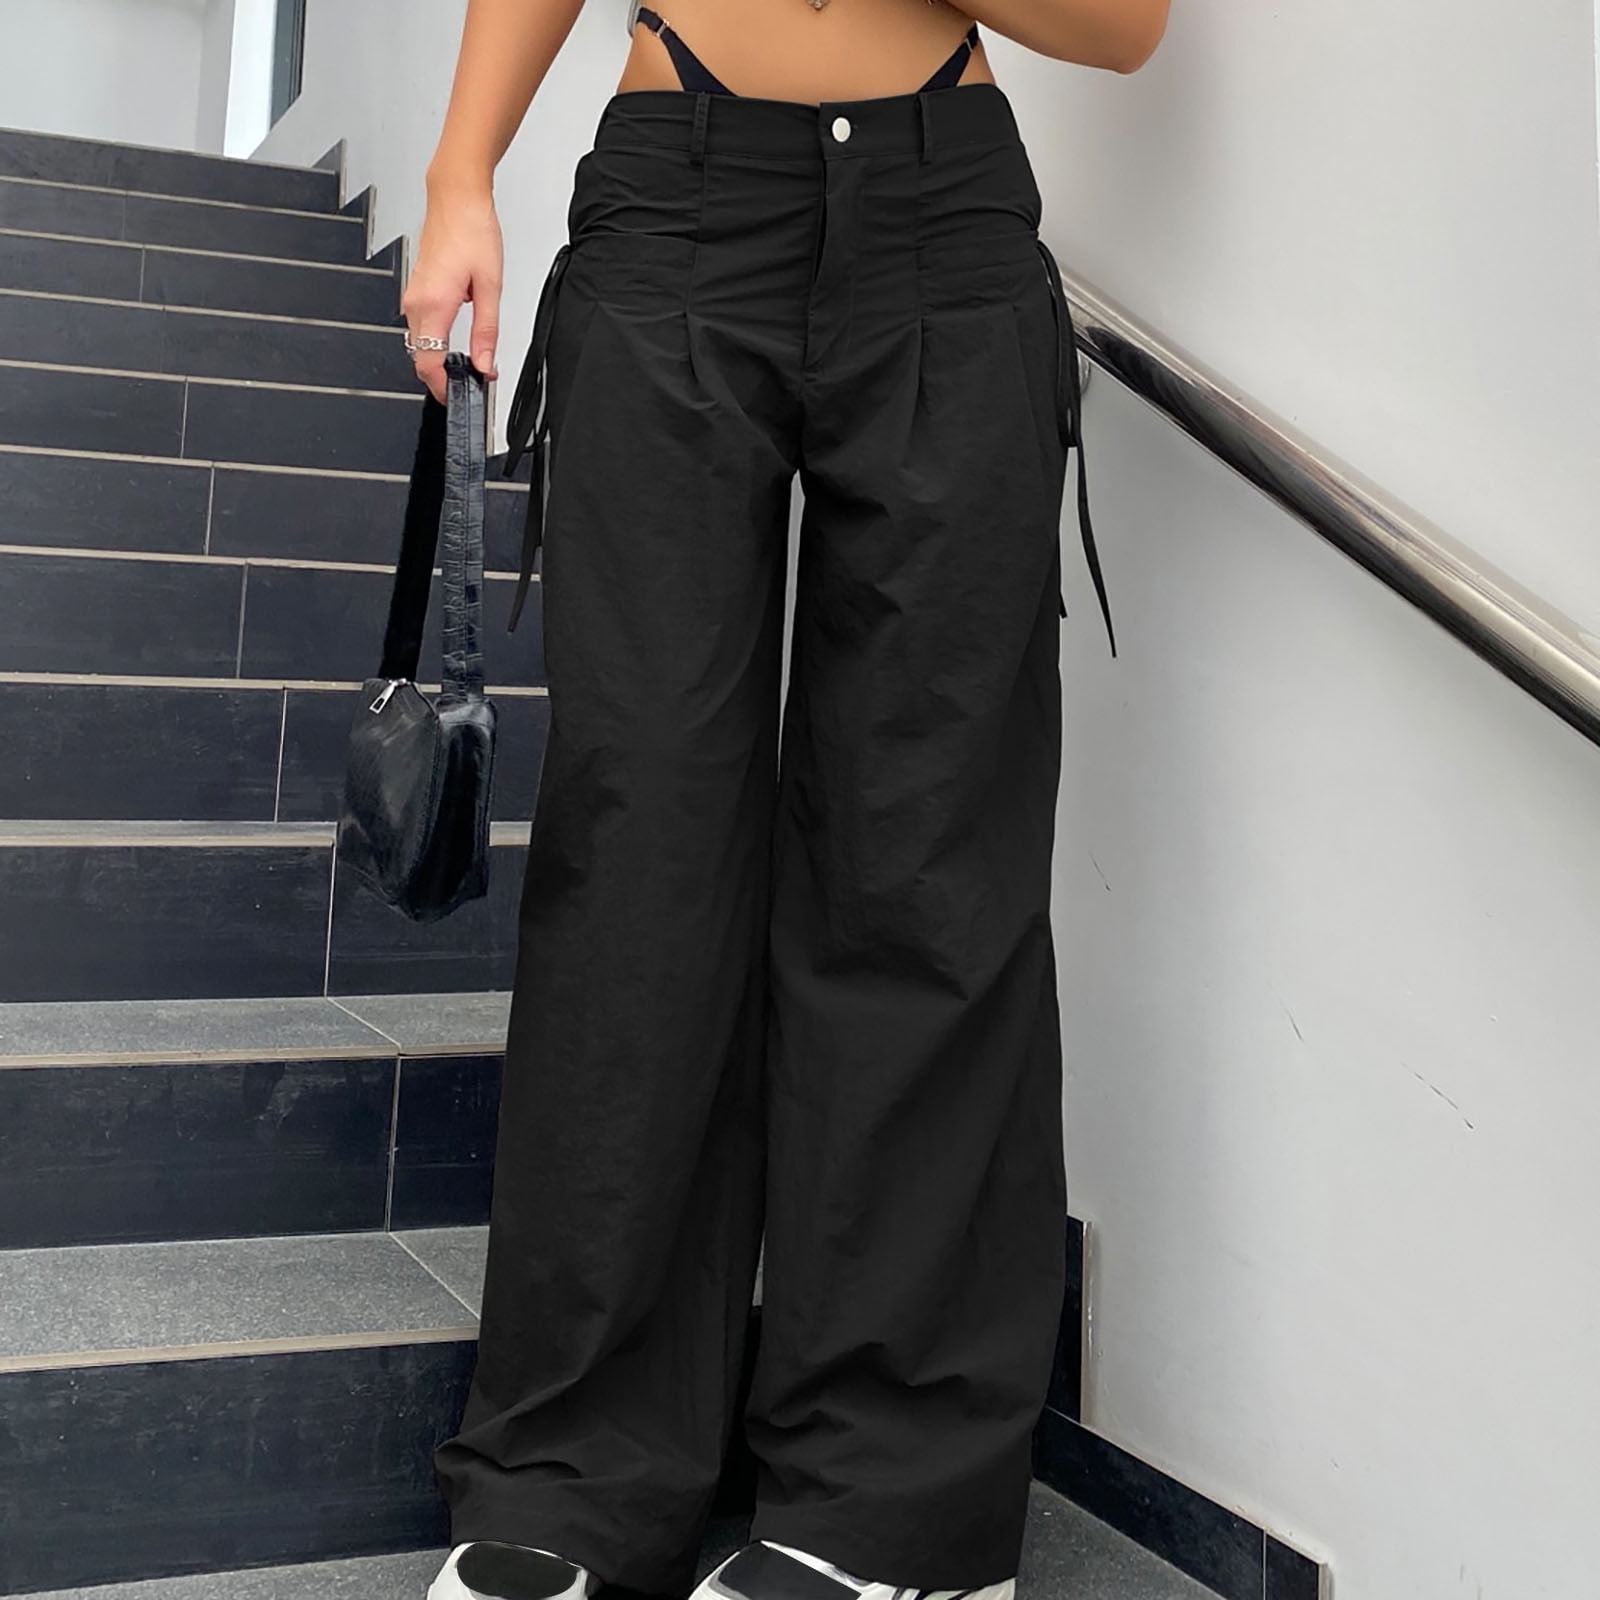 SELONE Cargo Pants Women for Street Y2K Fashion Plus Multi Athletic Pant Pants Size Sports Style Black With Overalls Waist Trendy Pockets Running Low Workout Low Everyday Sense Long Design Wear Rise